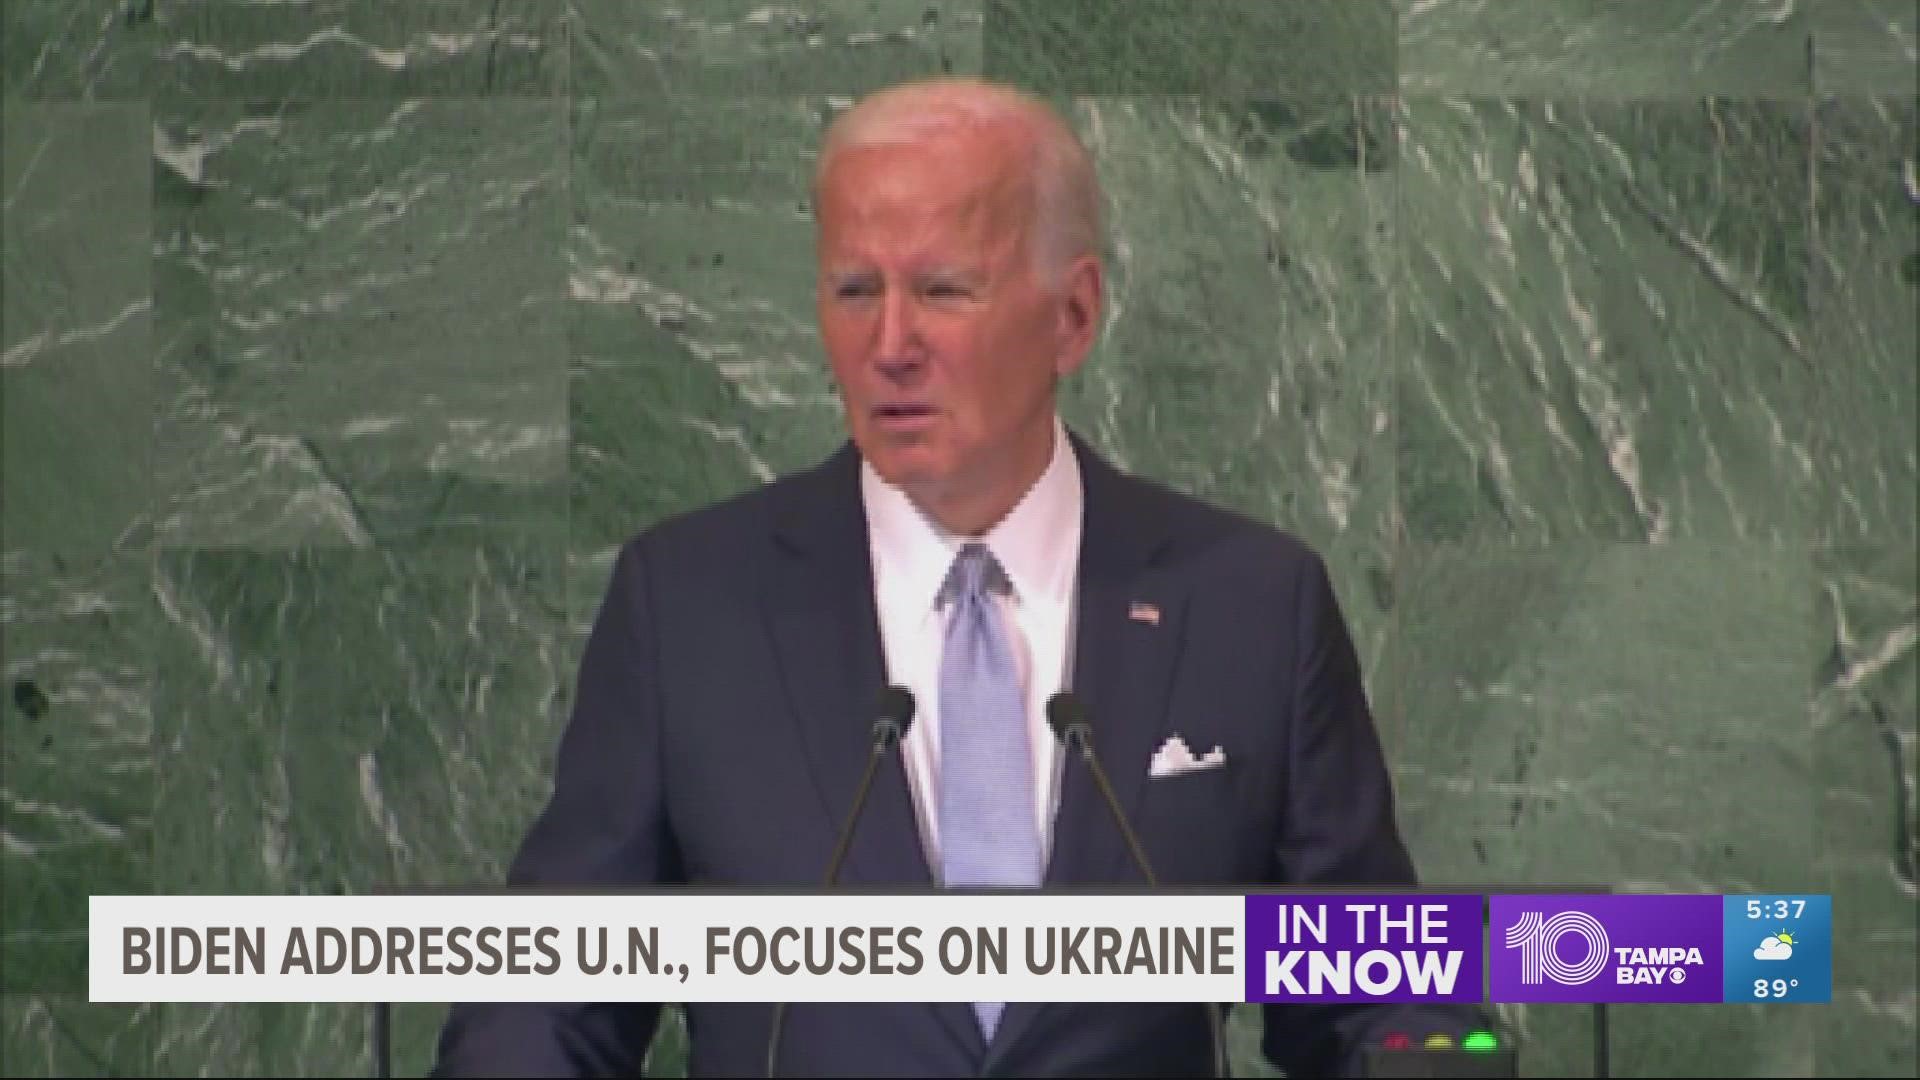 Biden called on all nations to speak out against Russia's “brutal, needless war” and to bolster Ukraine's effort to defend itself.